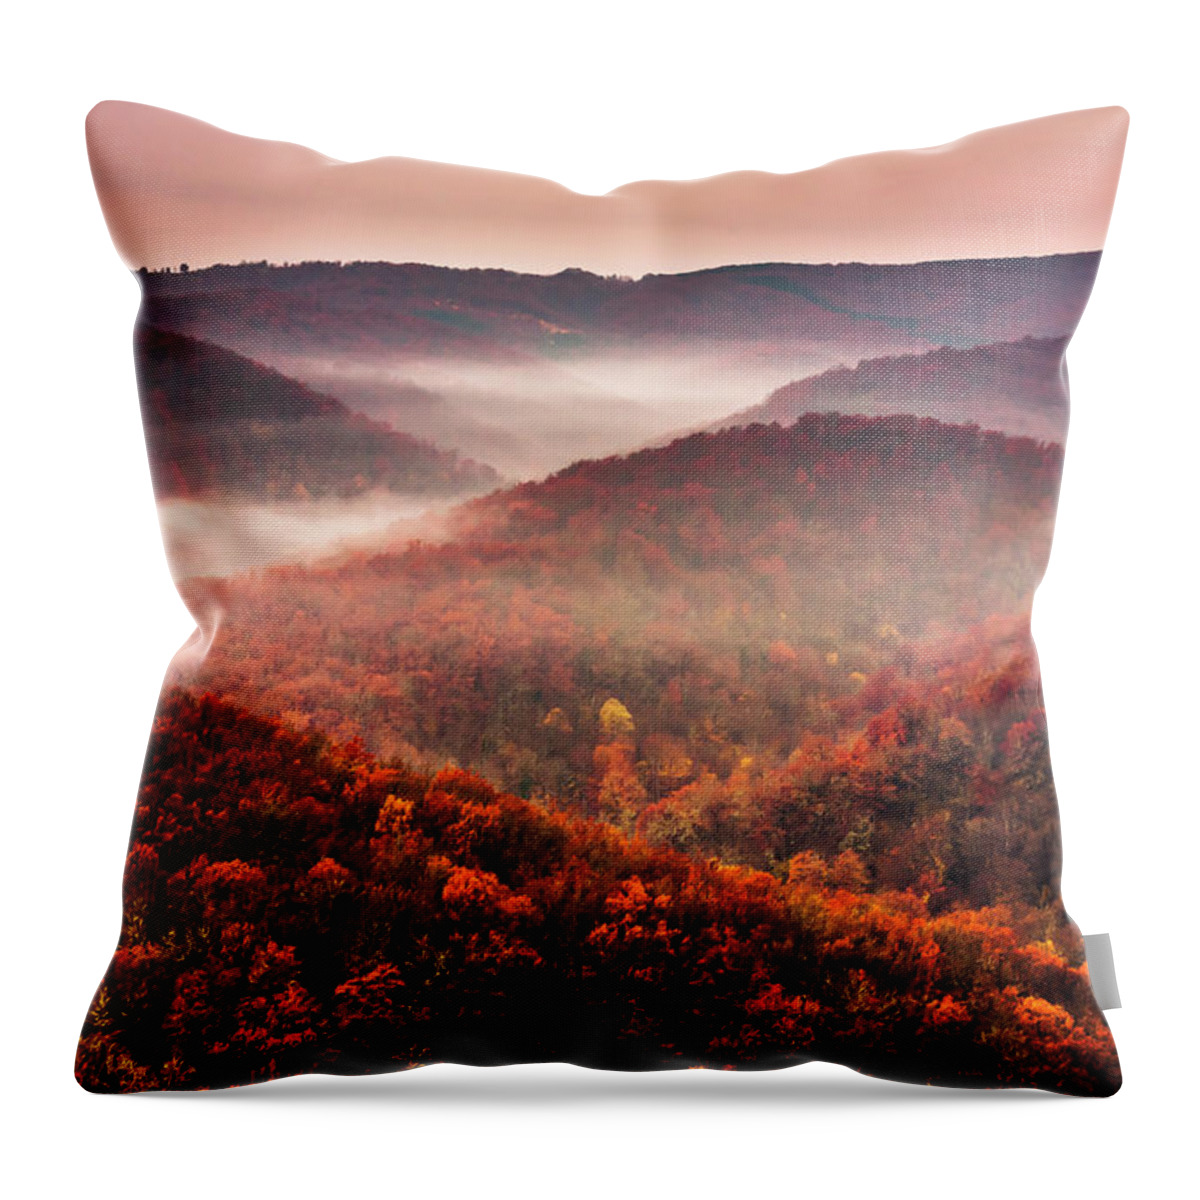 Bulgaria Throw Pillow featuring the photograph Autumn Fogs by Evgeni Dinev